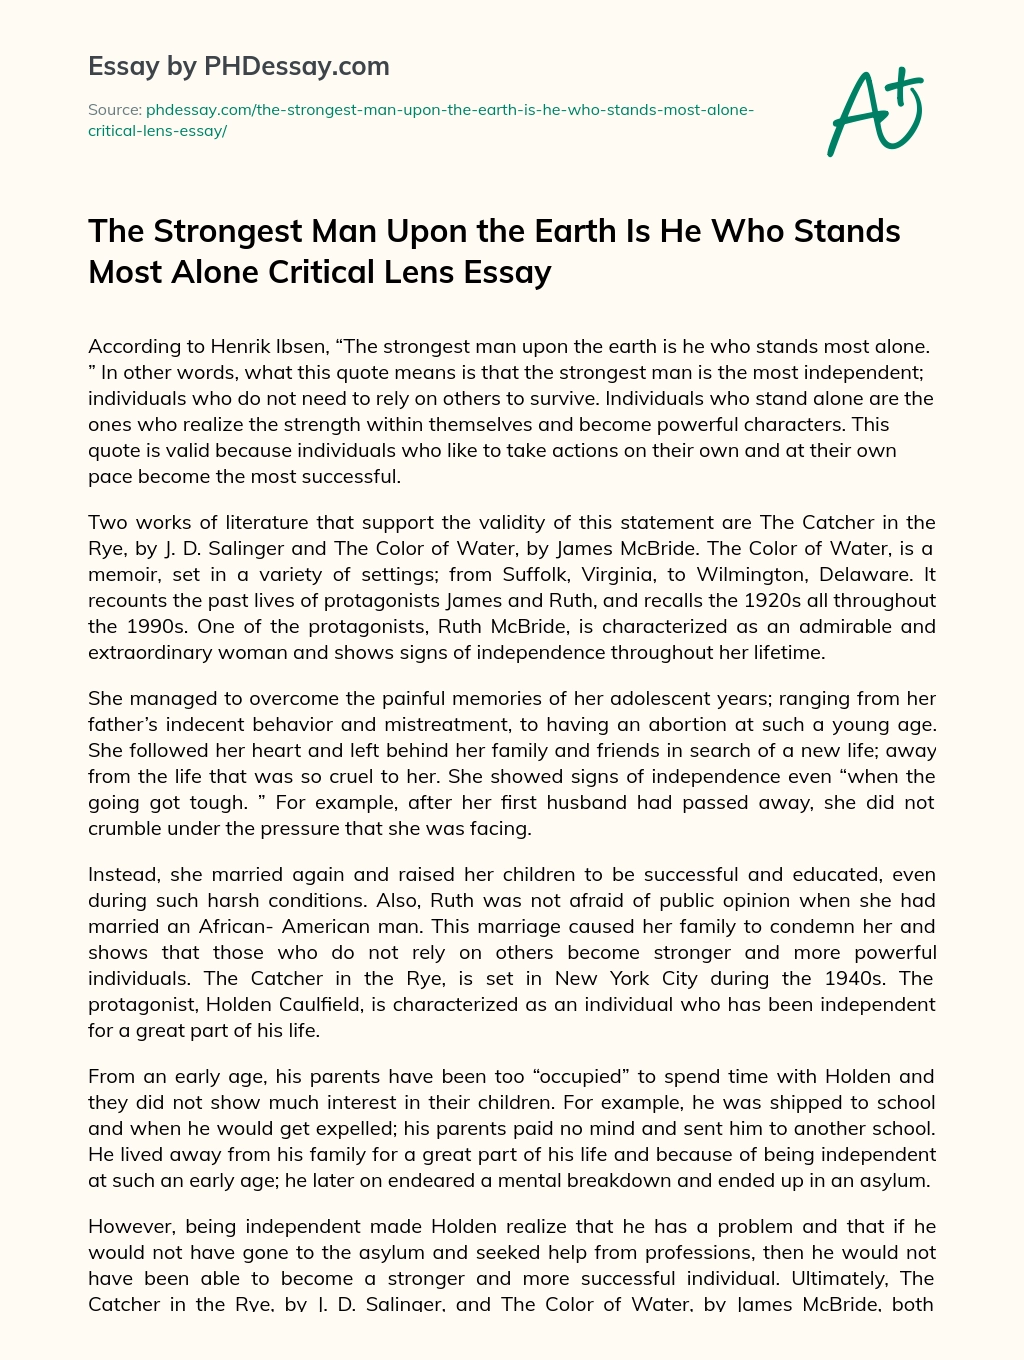 The Strongest Man Upon the Earth Is He Who Stands Most Alone Critical Lens Essay essay